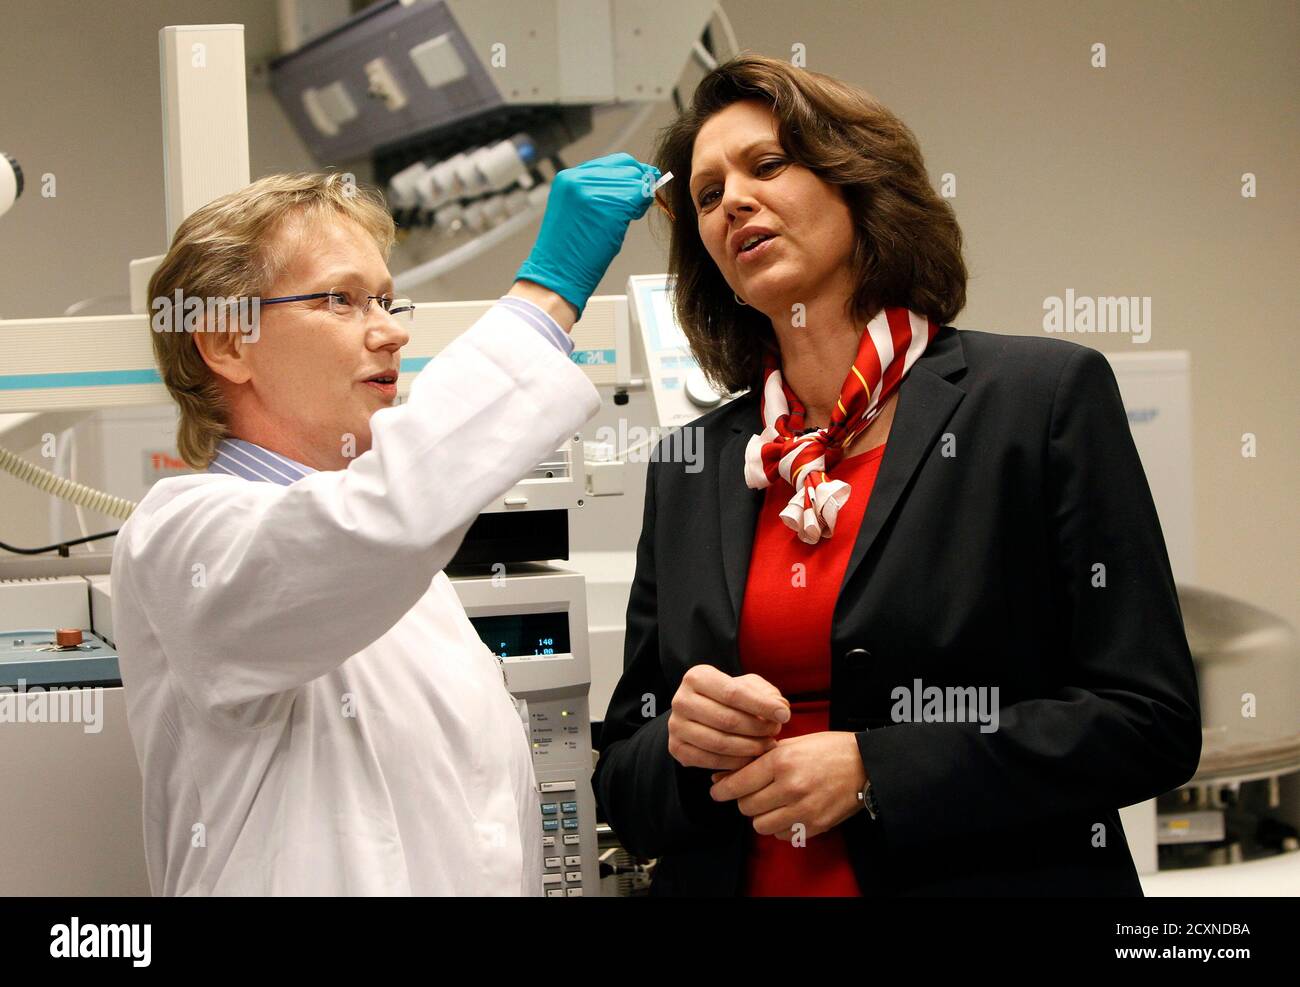 German Agriculture Minister Ilse Aigner watches a Dioxin test sample  displayed by Elke Bruns-Weller (L), head of the Dioxin test laboratory,  during her visit at a laboratory of Lower Saxony's State Office